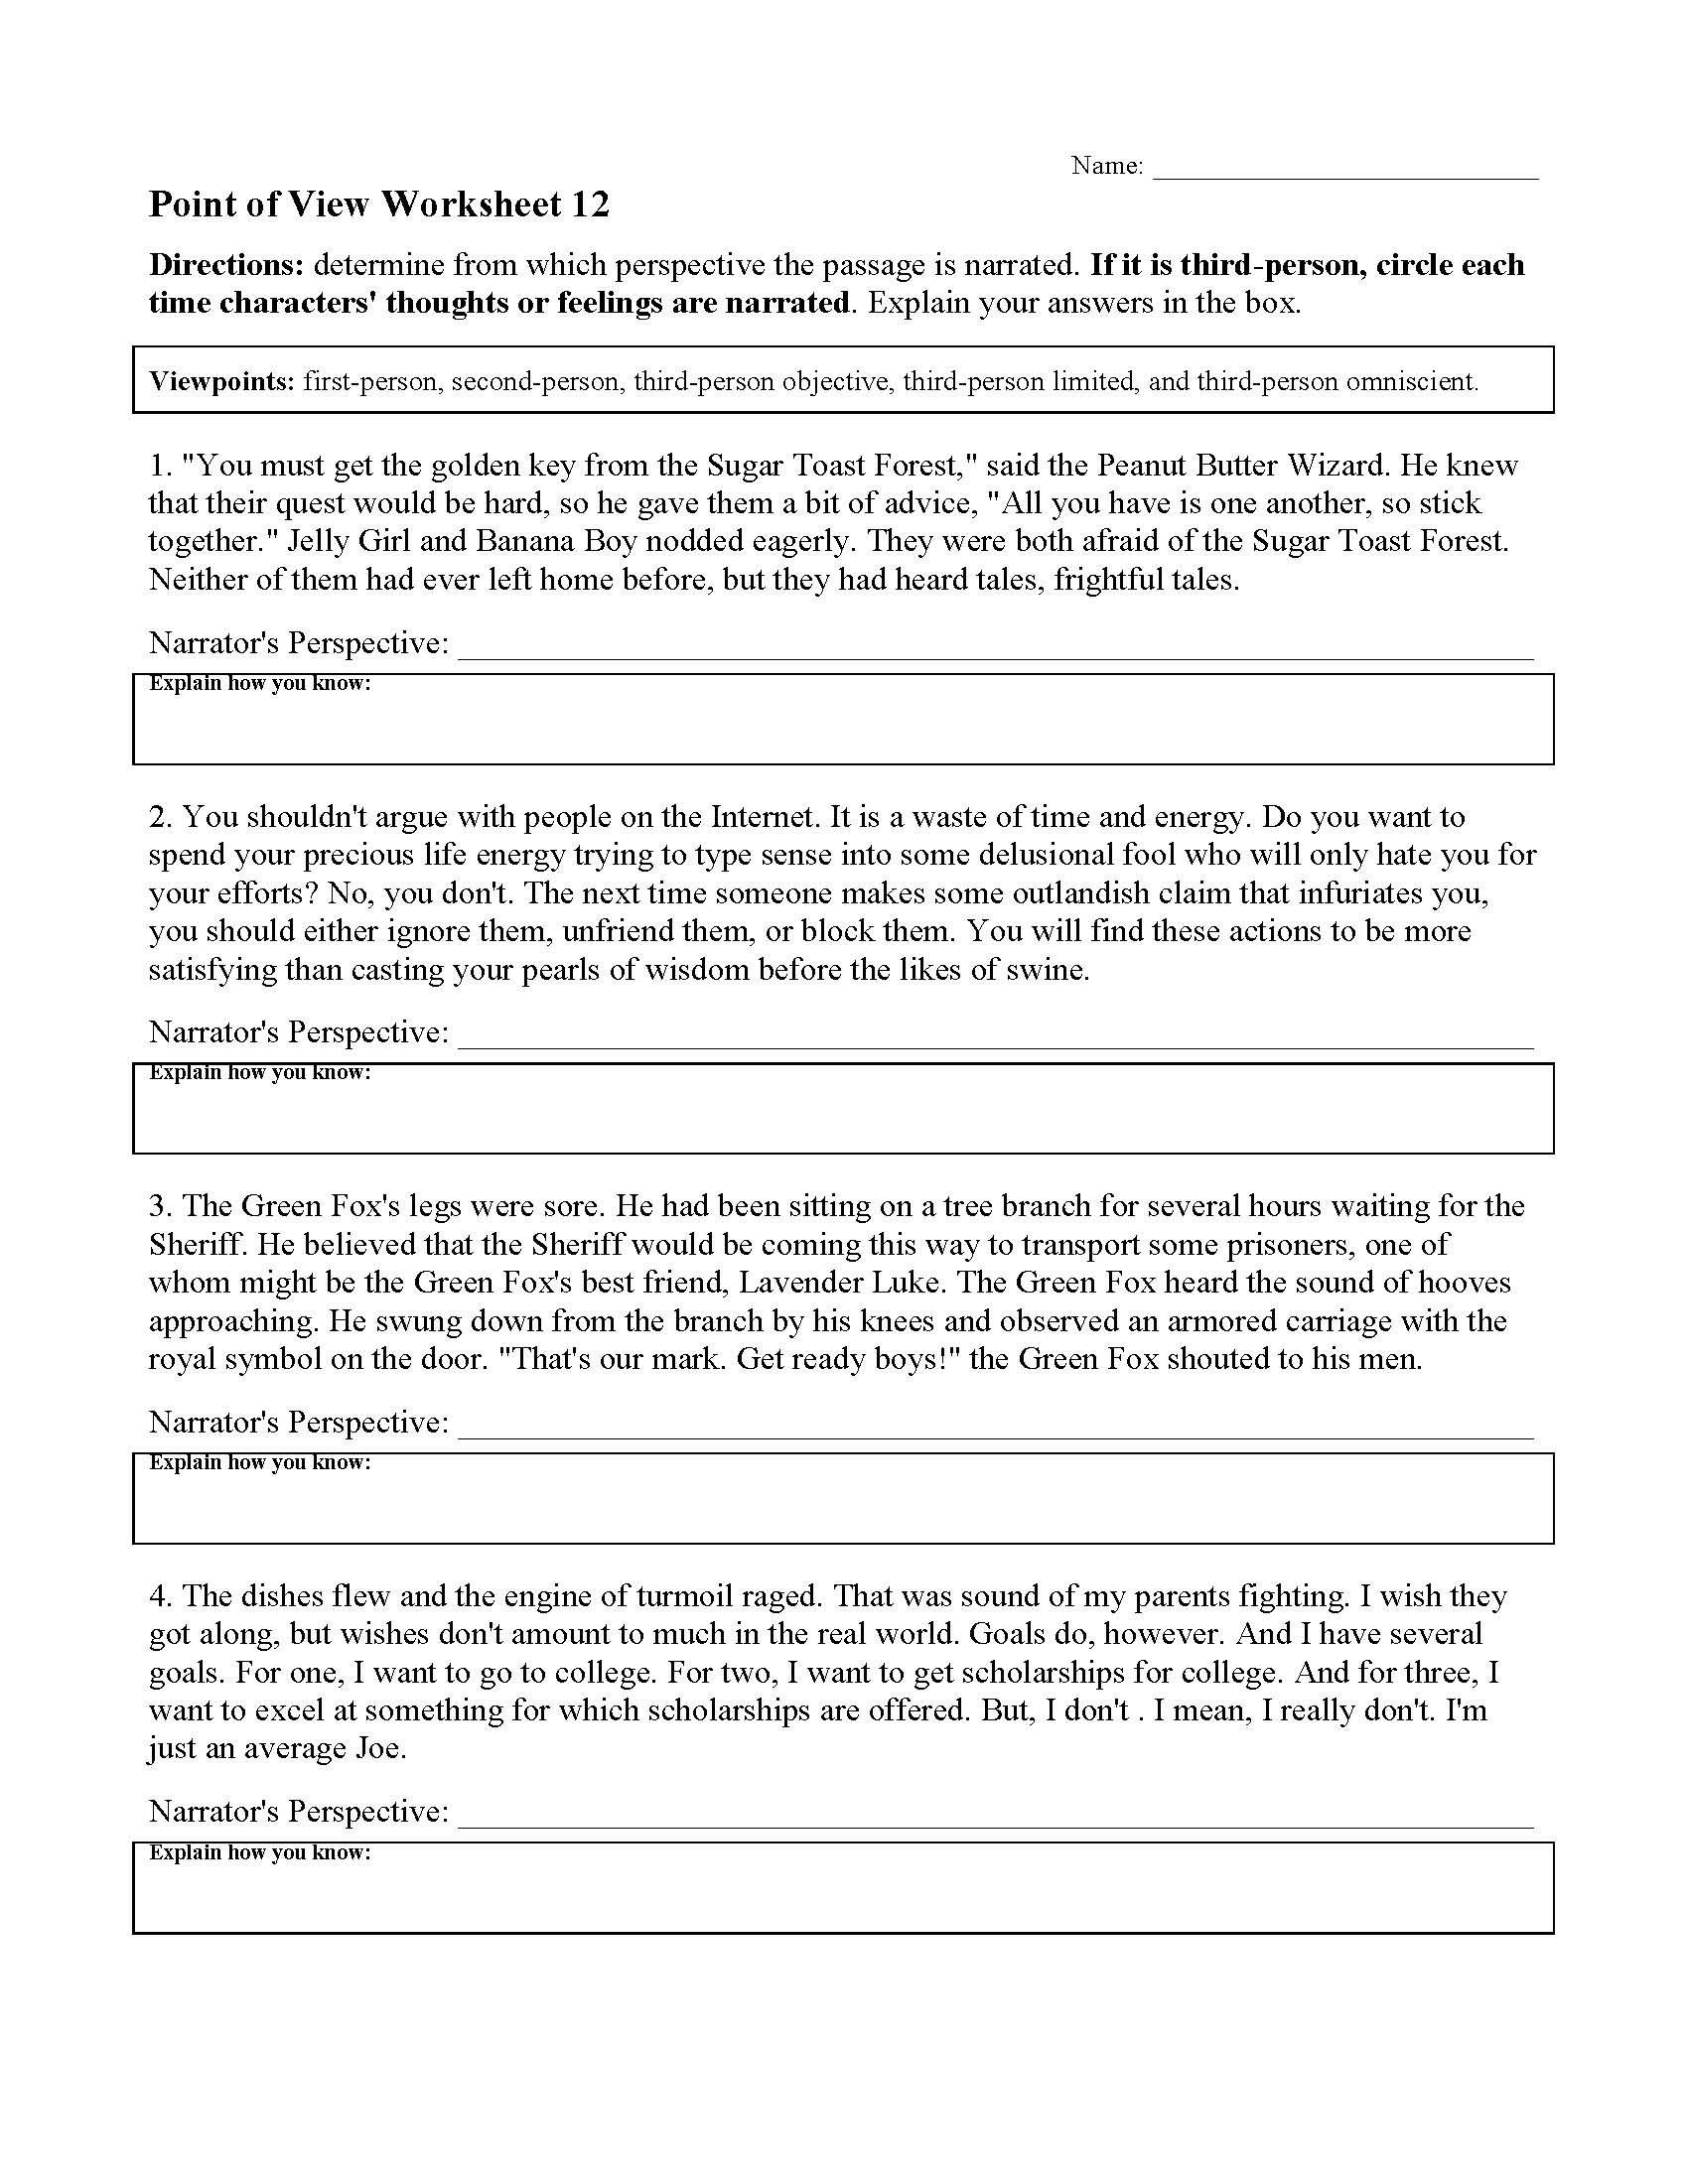 point-of-view-worksheet-12